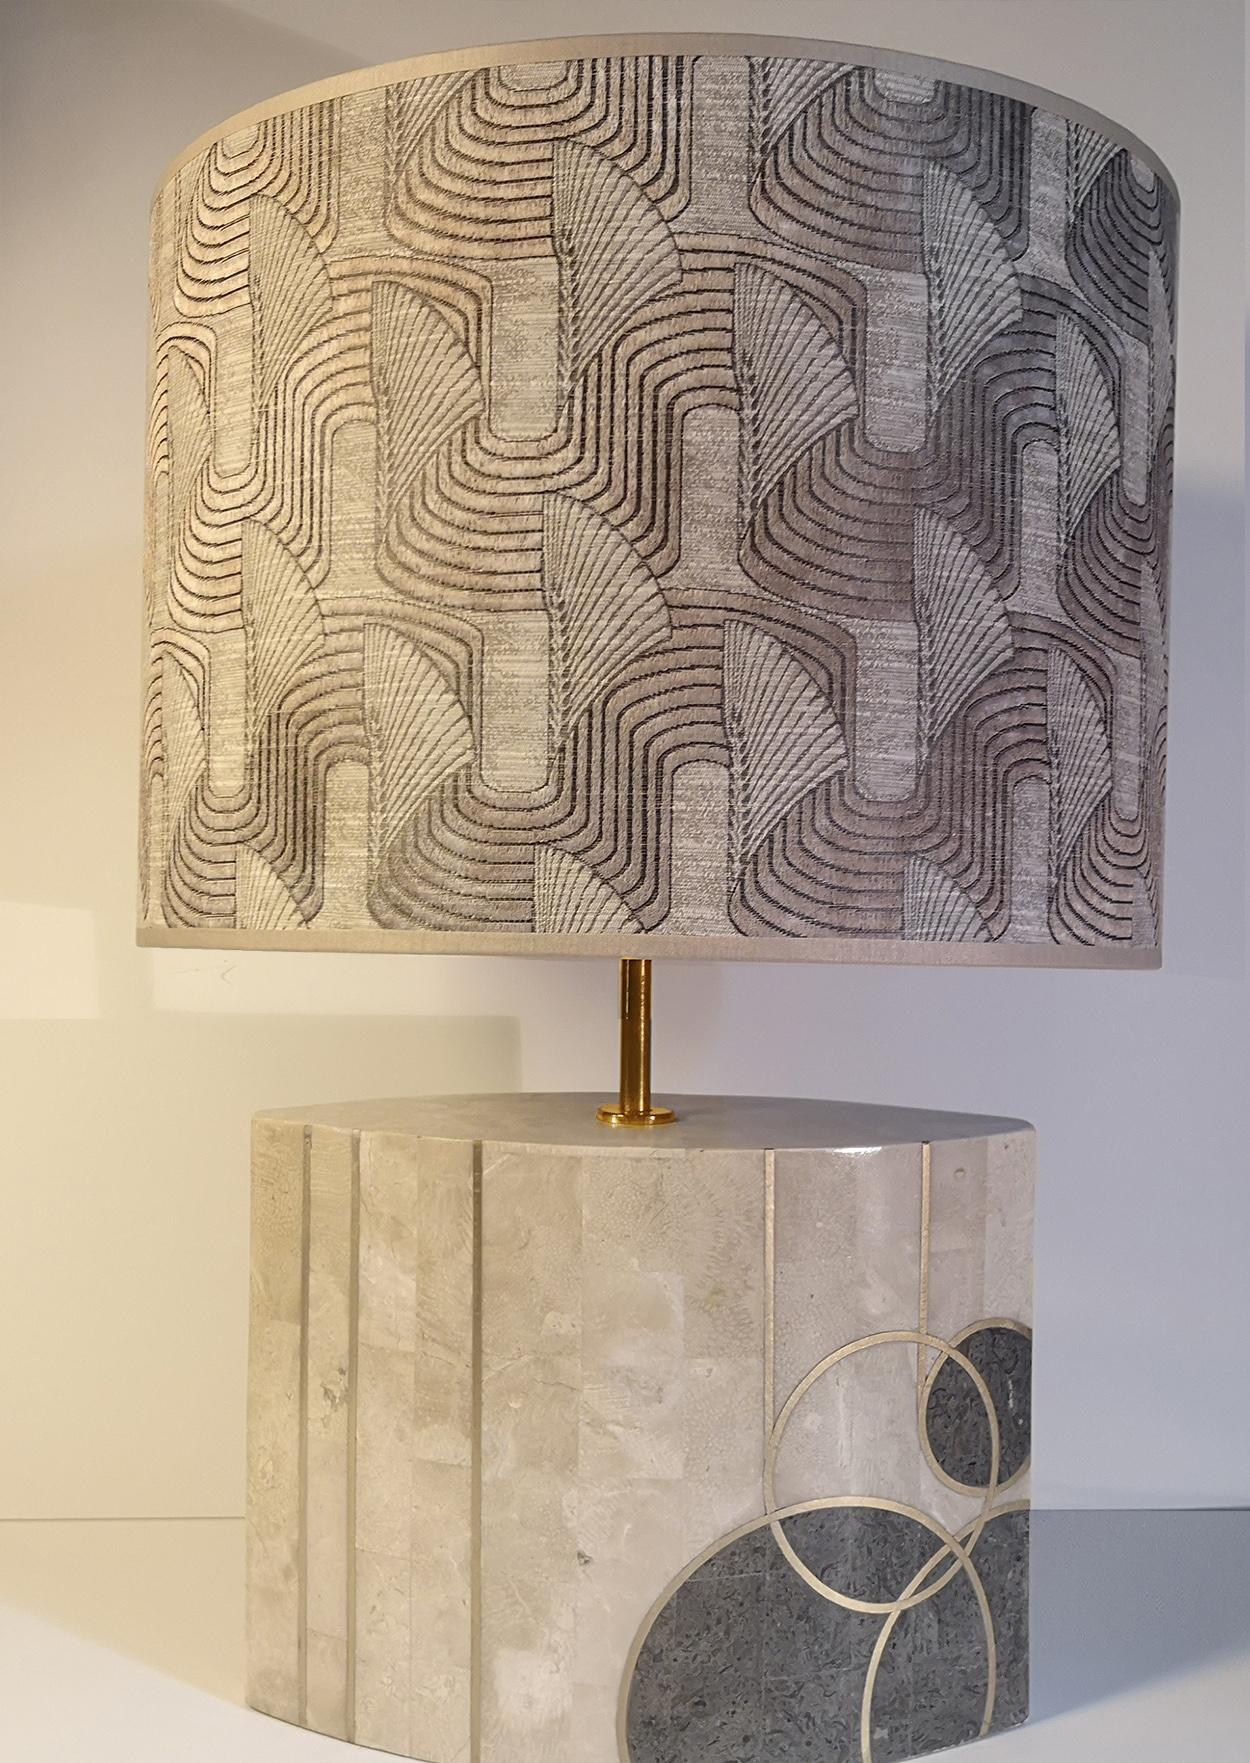 An unique table lamp with a large marble base. The lamp is ornamented with circles and gold details. It comes with a handmade lampshade with a striped pattern which gives a warm light.
The lamp is manufactured in Italy, Europe around